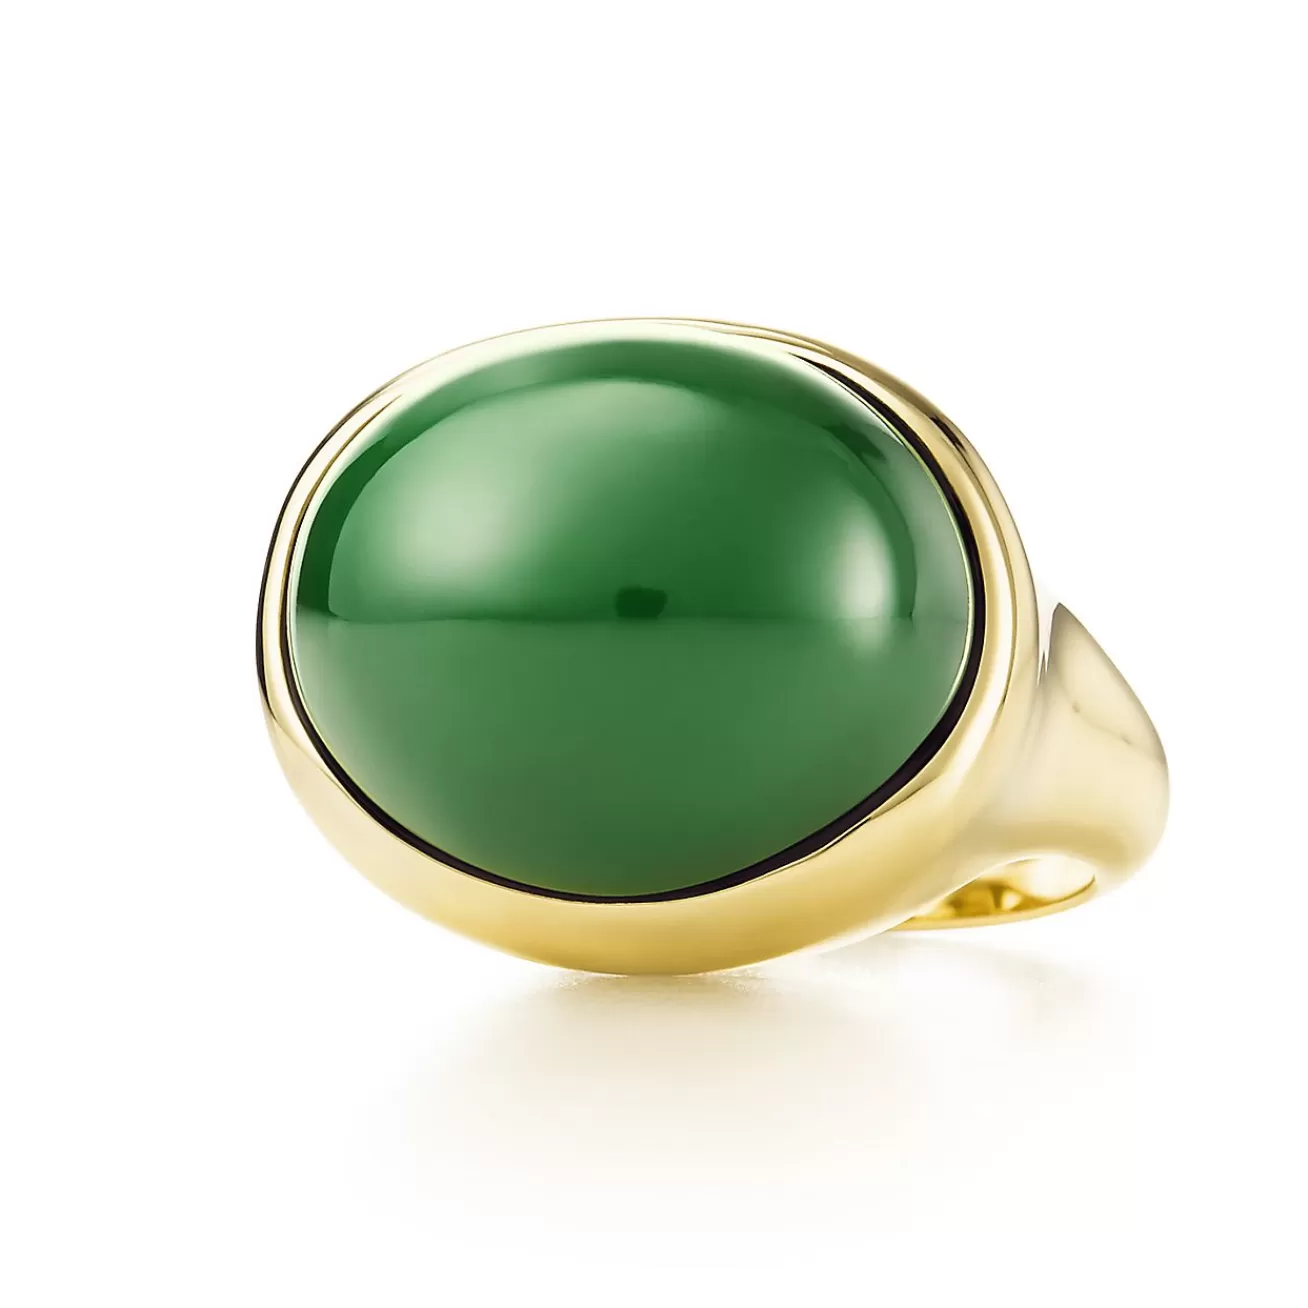 Tiffany & Co. Elsa Peretti® Cabochon ring in 18k gold with green jade, 19 mm wide. | ^ Rings | Gold Jewelry